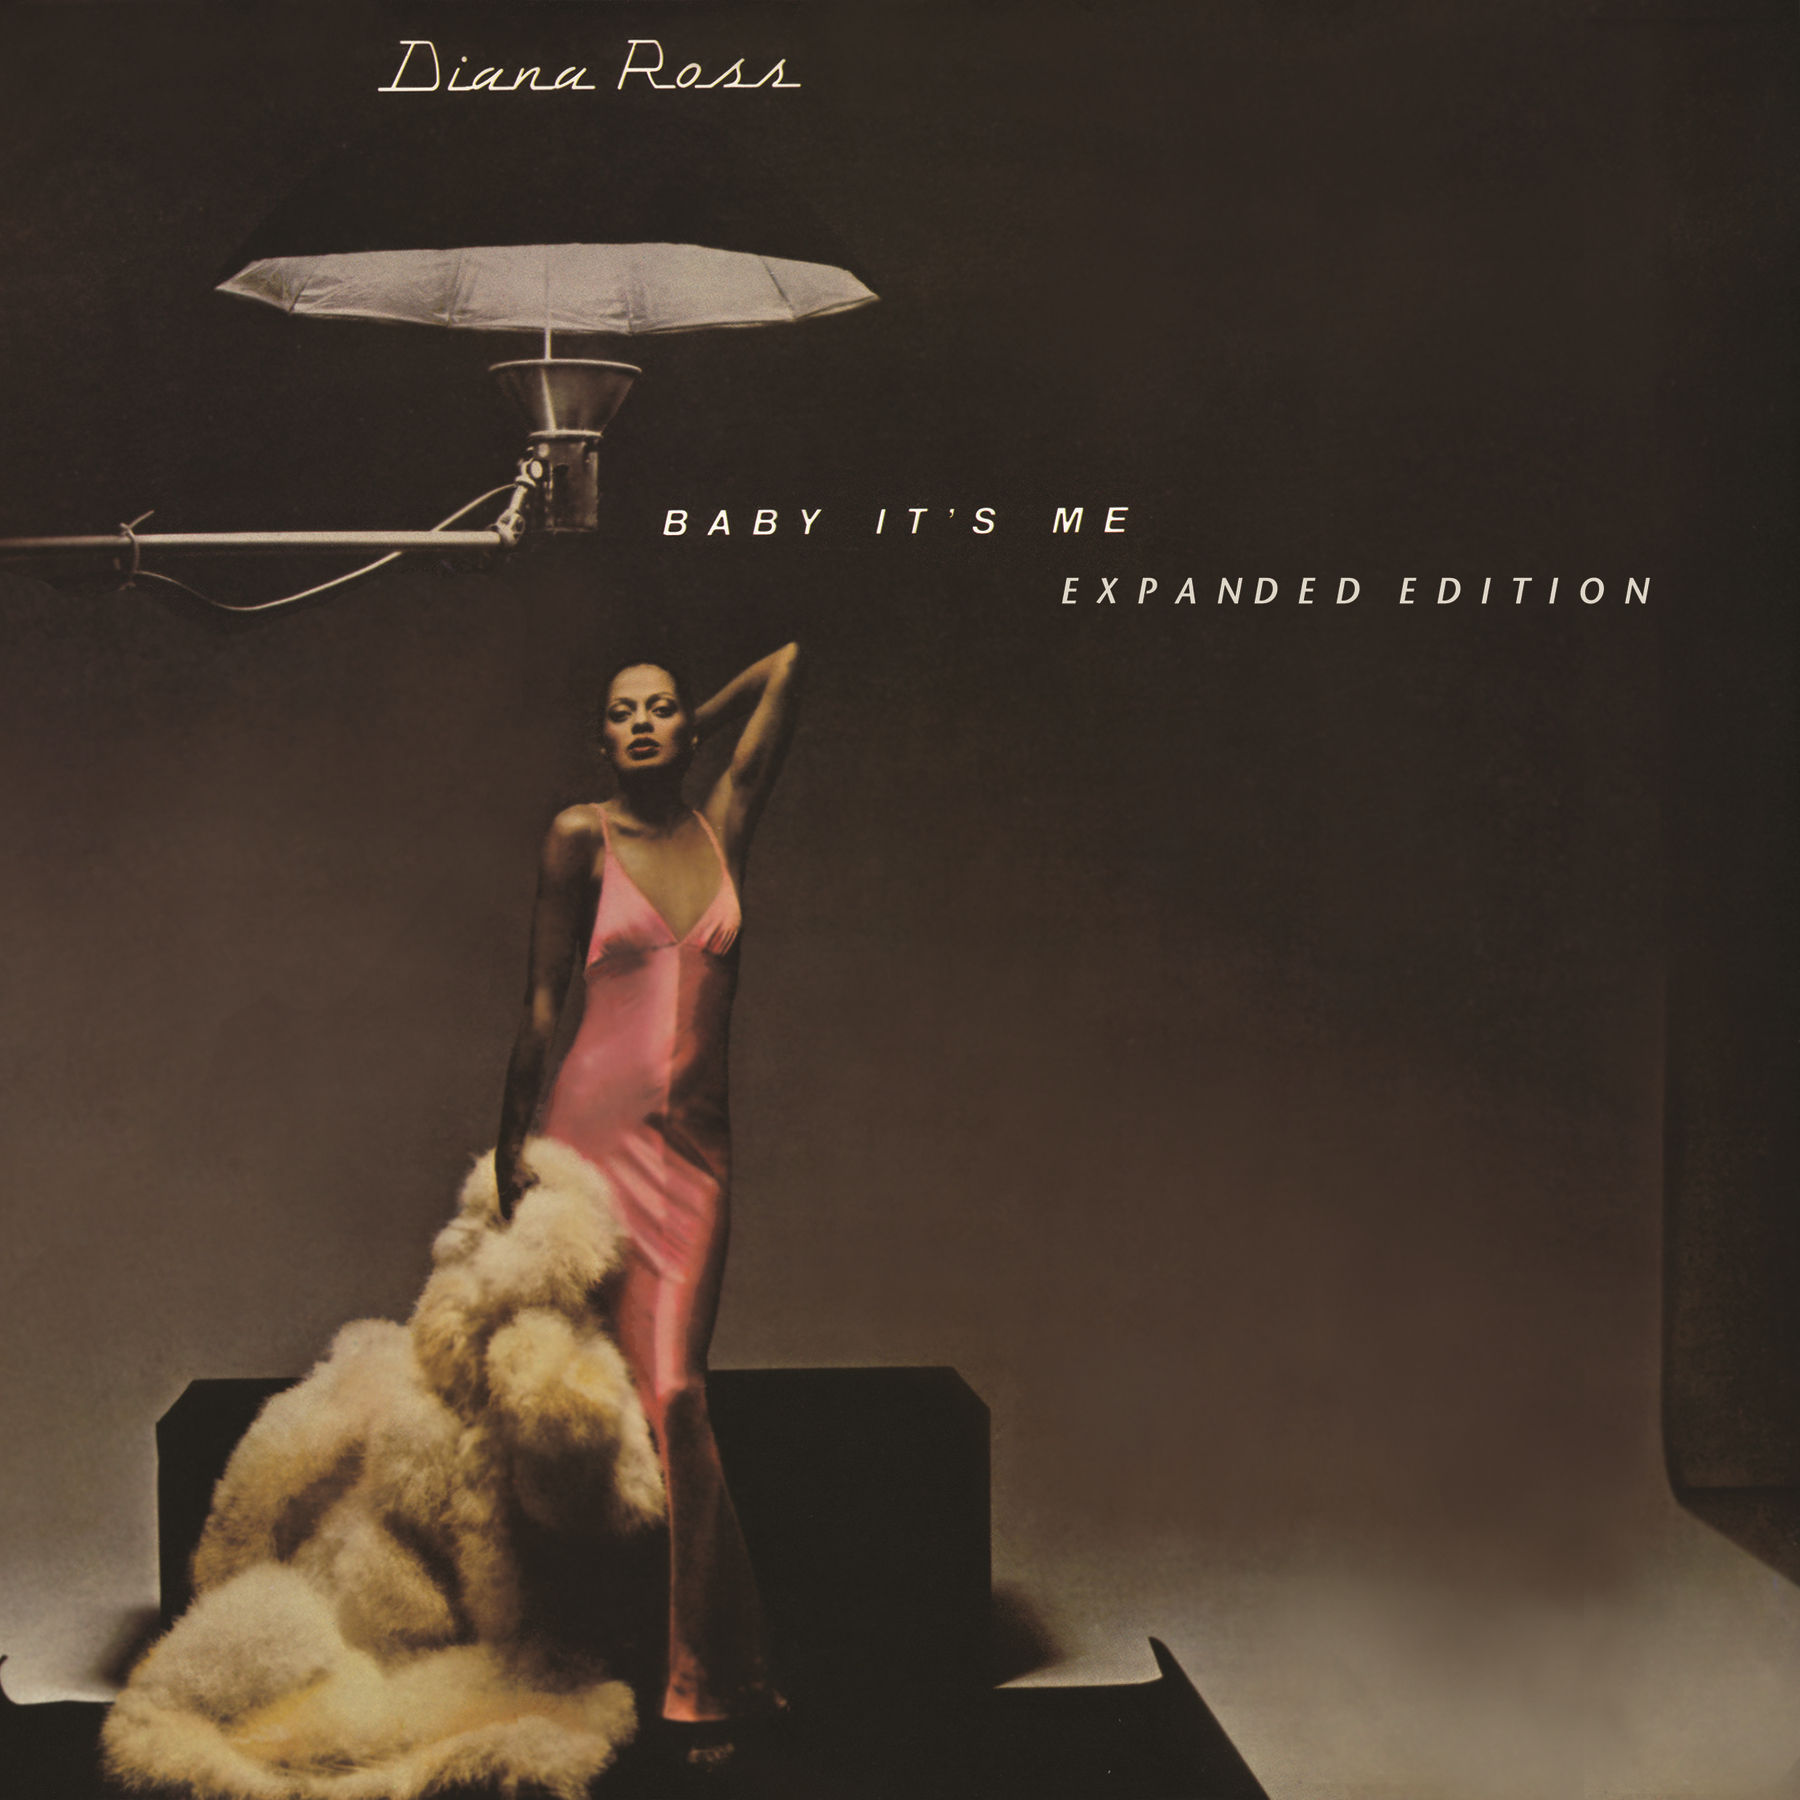 Diana Ross – Baby It’s Me {Expanded Edition} (1977/2014) [HDTracks 24bit/96kHz]